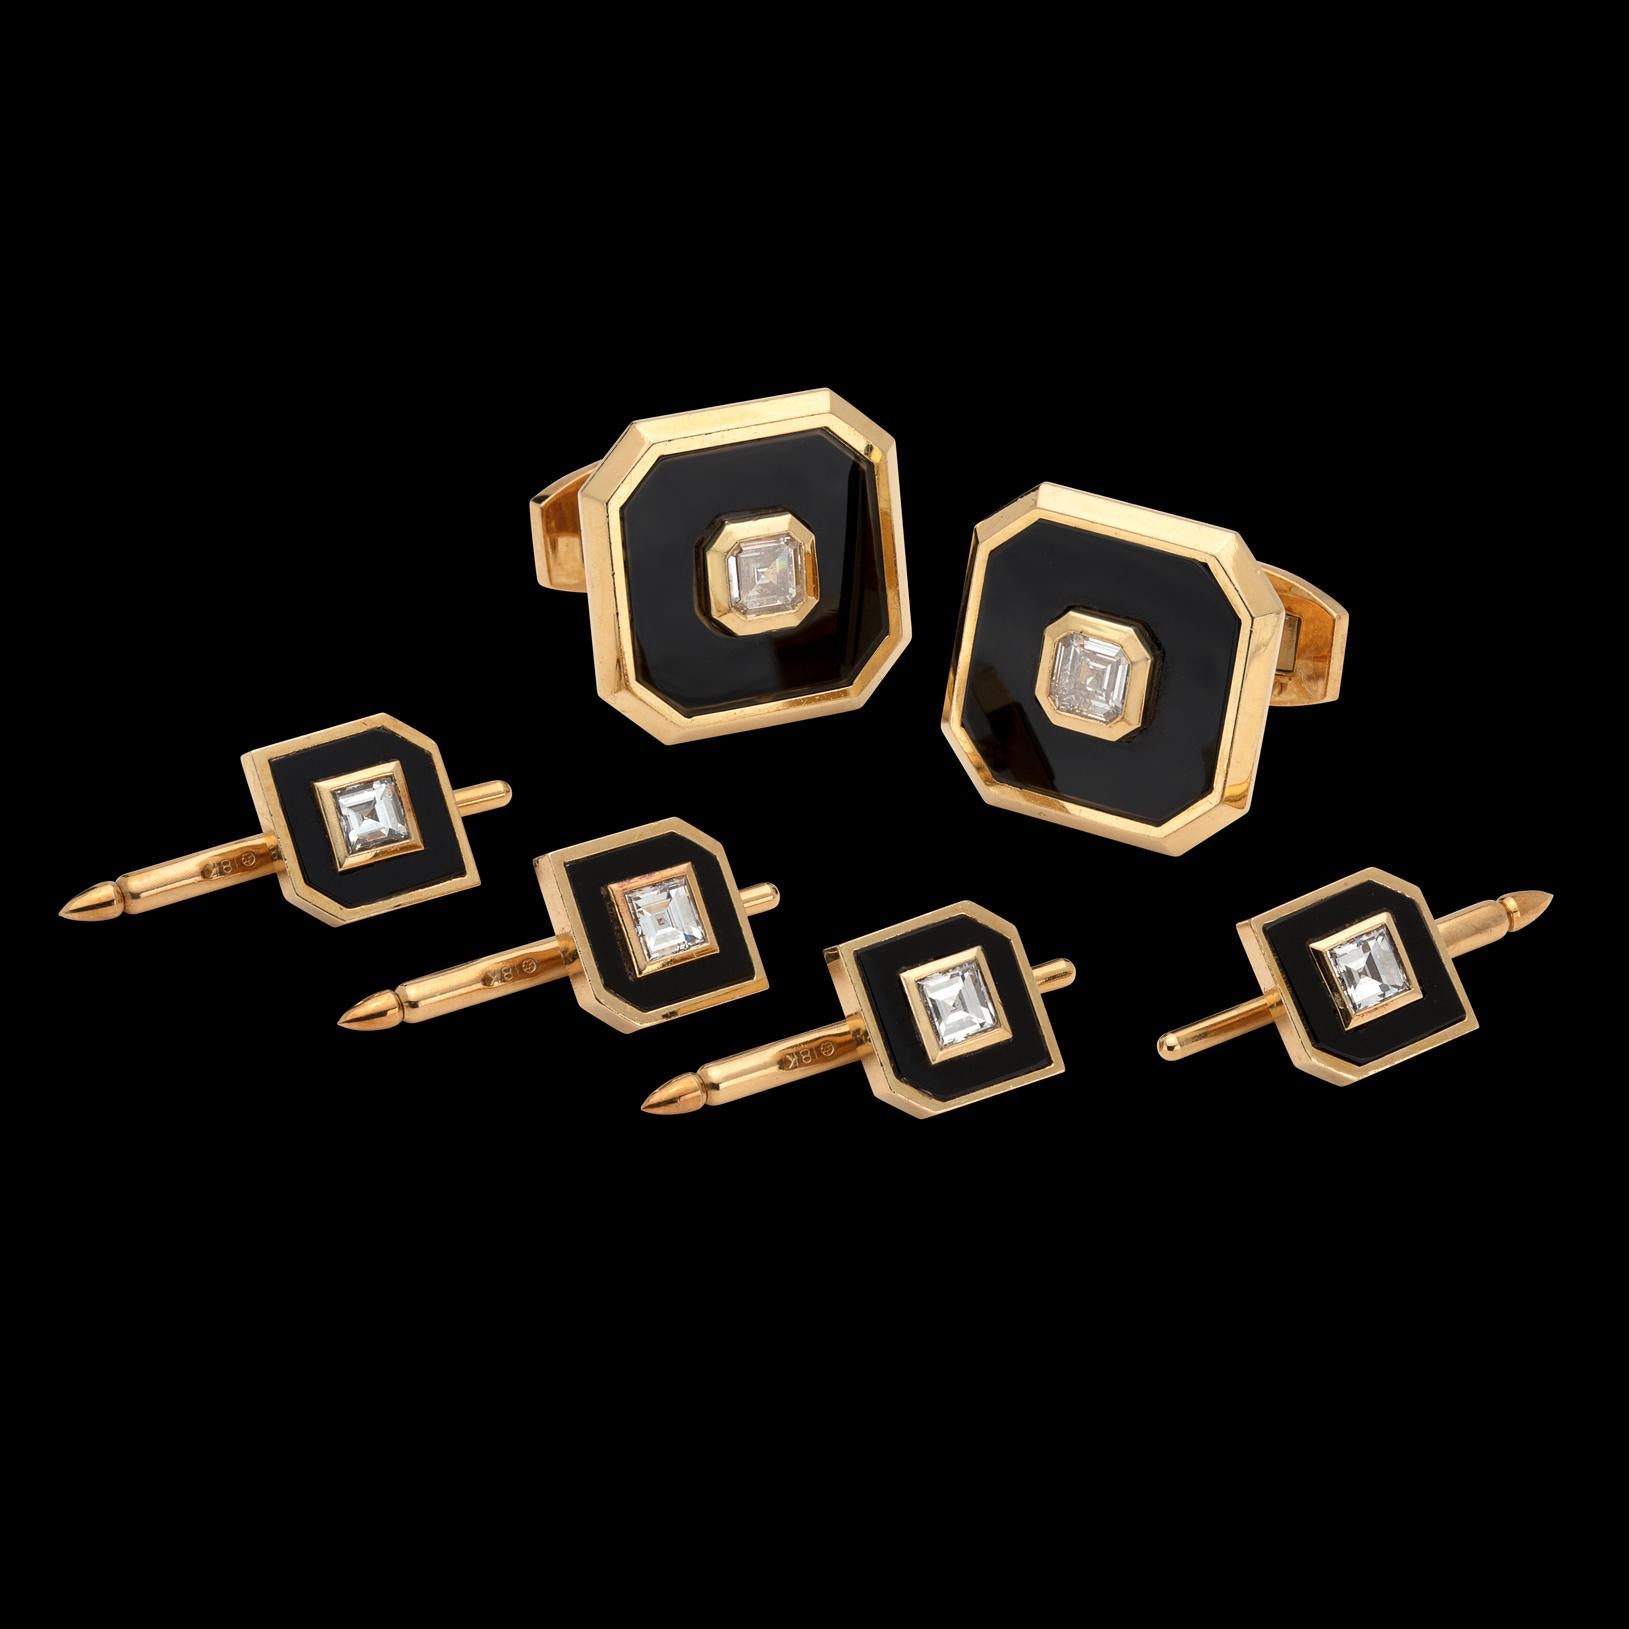 Wonderful Kathleen Dughi designed pair of 18k gold men's cufflinks, set with two Asscher-cut diamonds bezel-set within black onyx tablets, together with a set of 4 shirt studs of similar design, each set with a square-cut diamond. The diamonds weigh